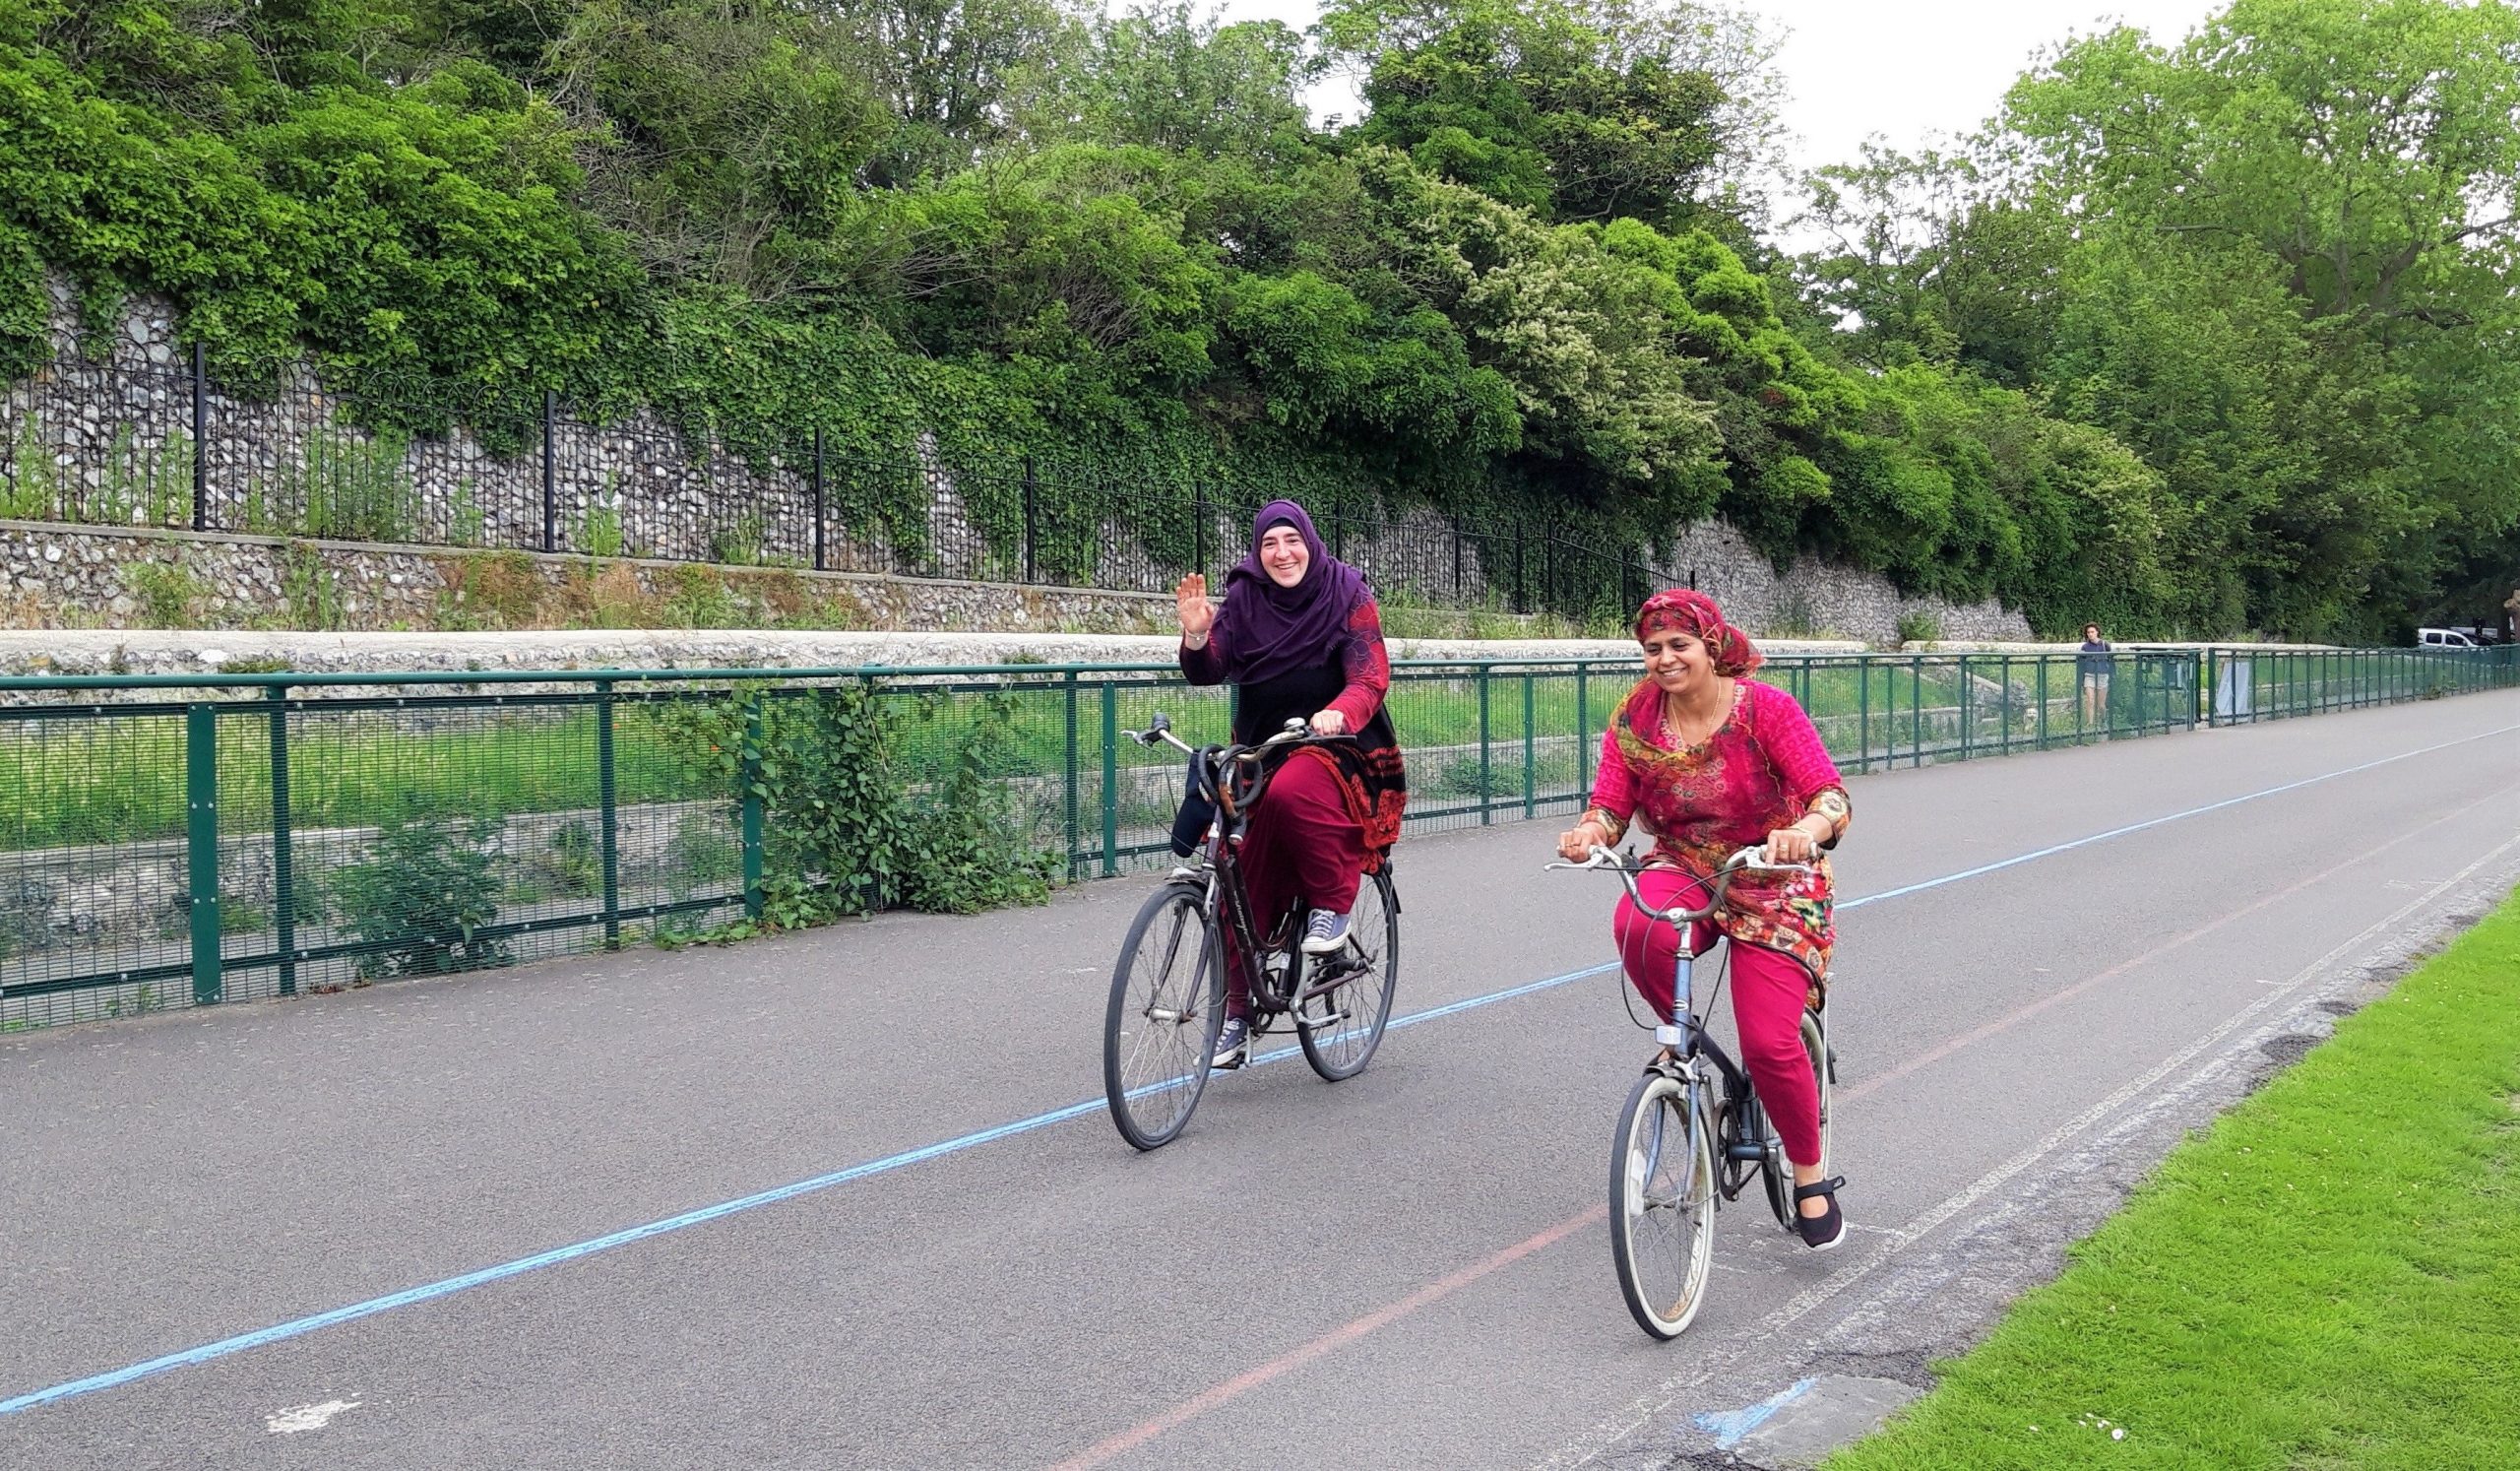 Two women cycle around preston park. One of them waves.